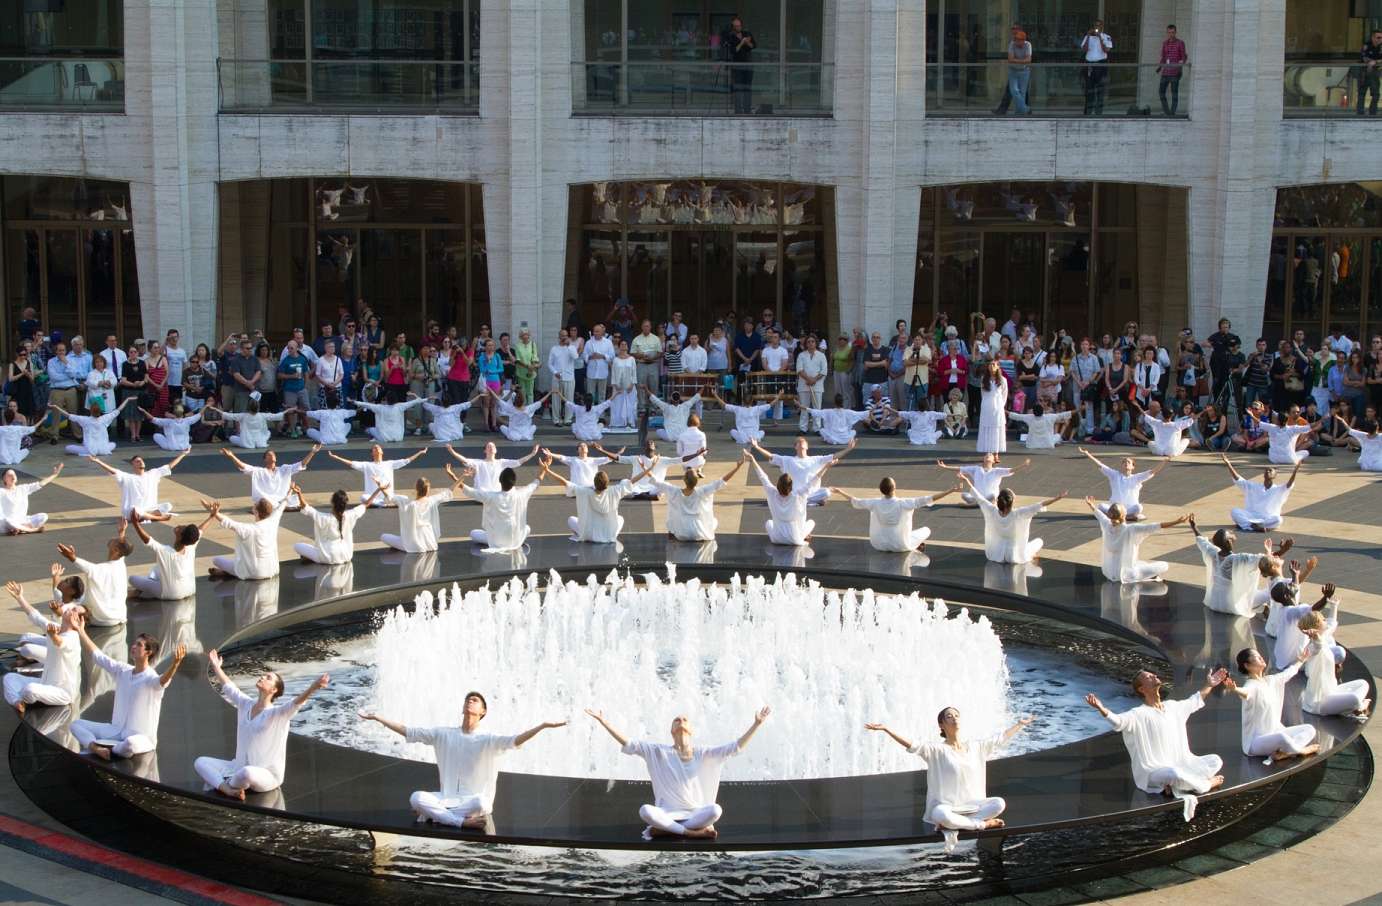 A group of people dressed in all white sit around a fountain in a circle with legs crossed and arms raised in the air. Two more circles of people in the same clothing and position surround them, and an audience stands around at the back.